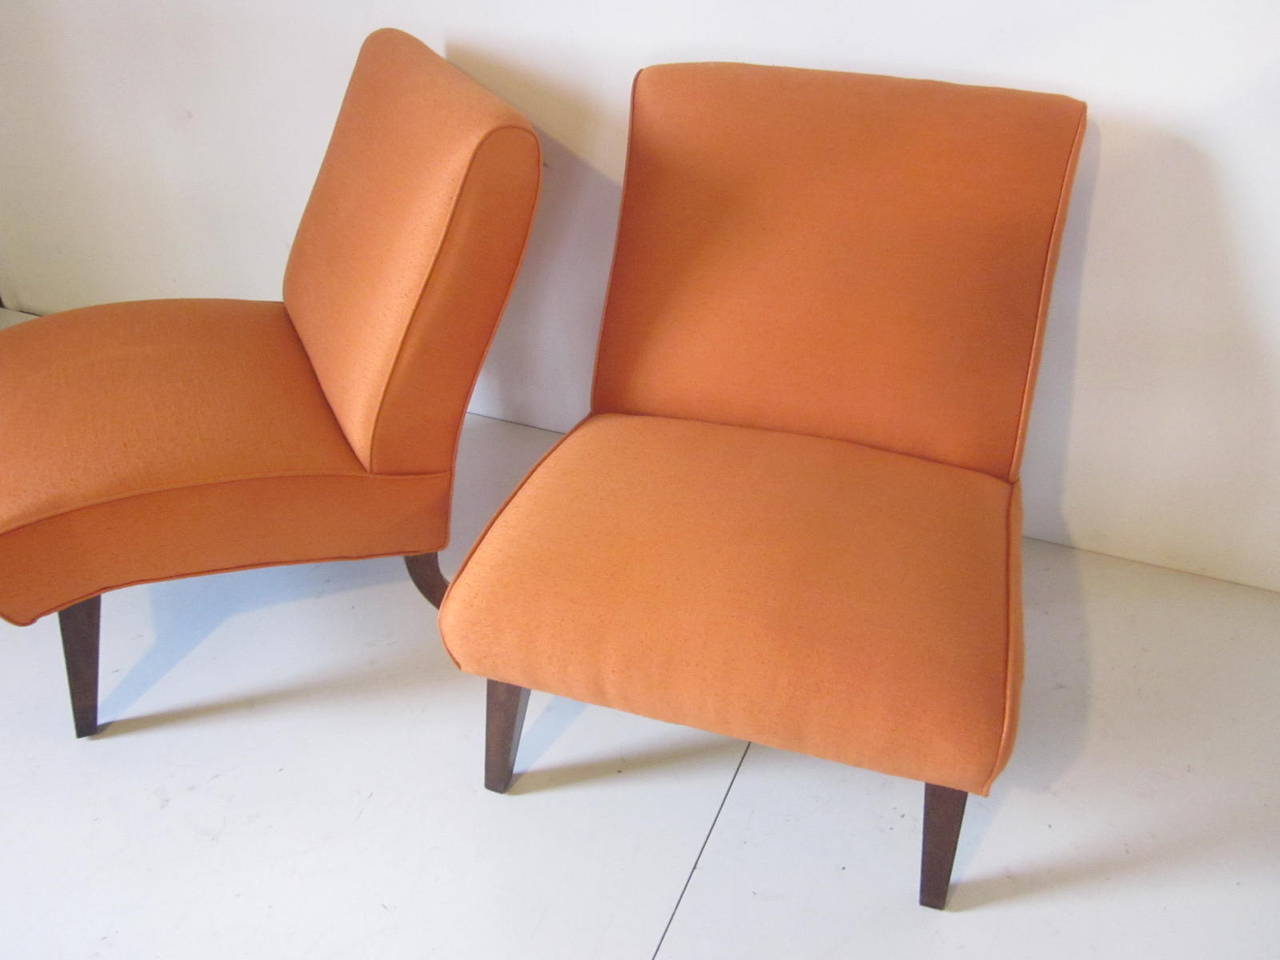 A pair of slipper chairs upholstered in a melon colored raw silk with mahogany legs in the style of Grosfeld House and designer Lorin Jackson.